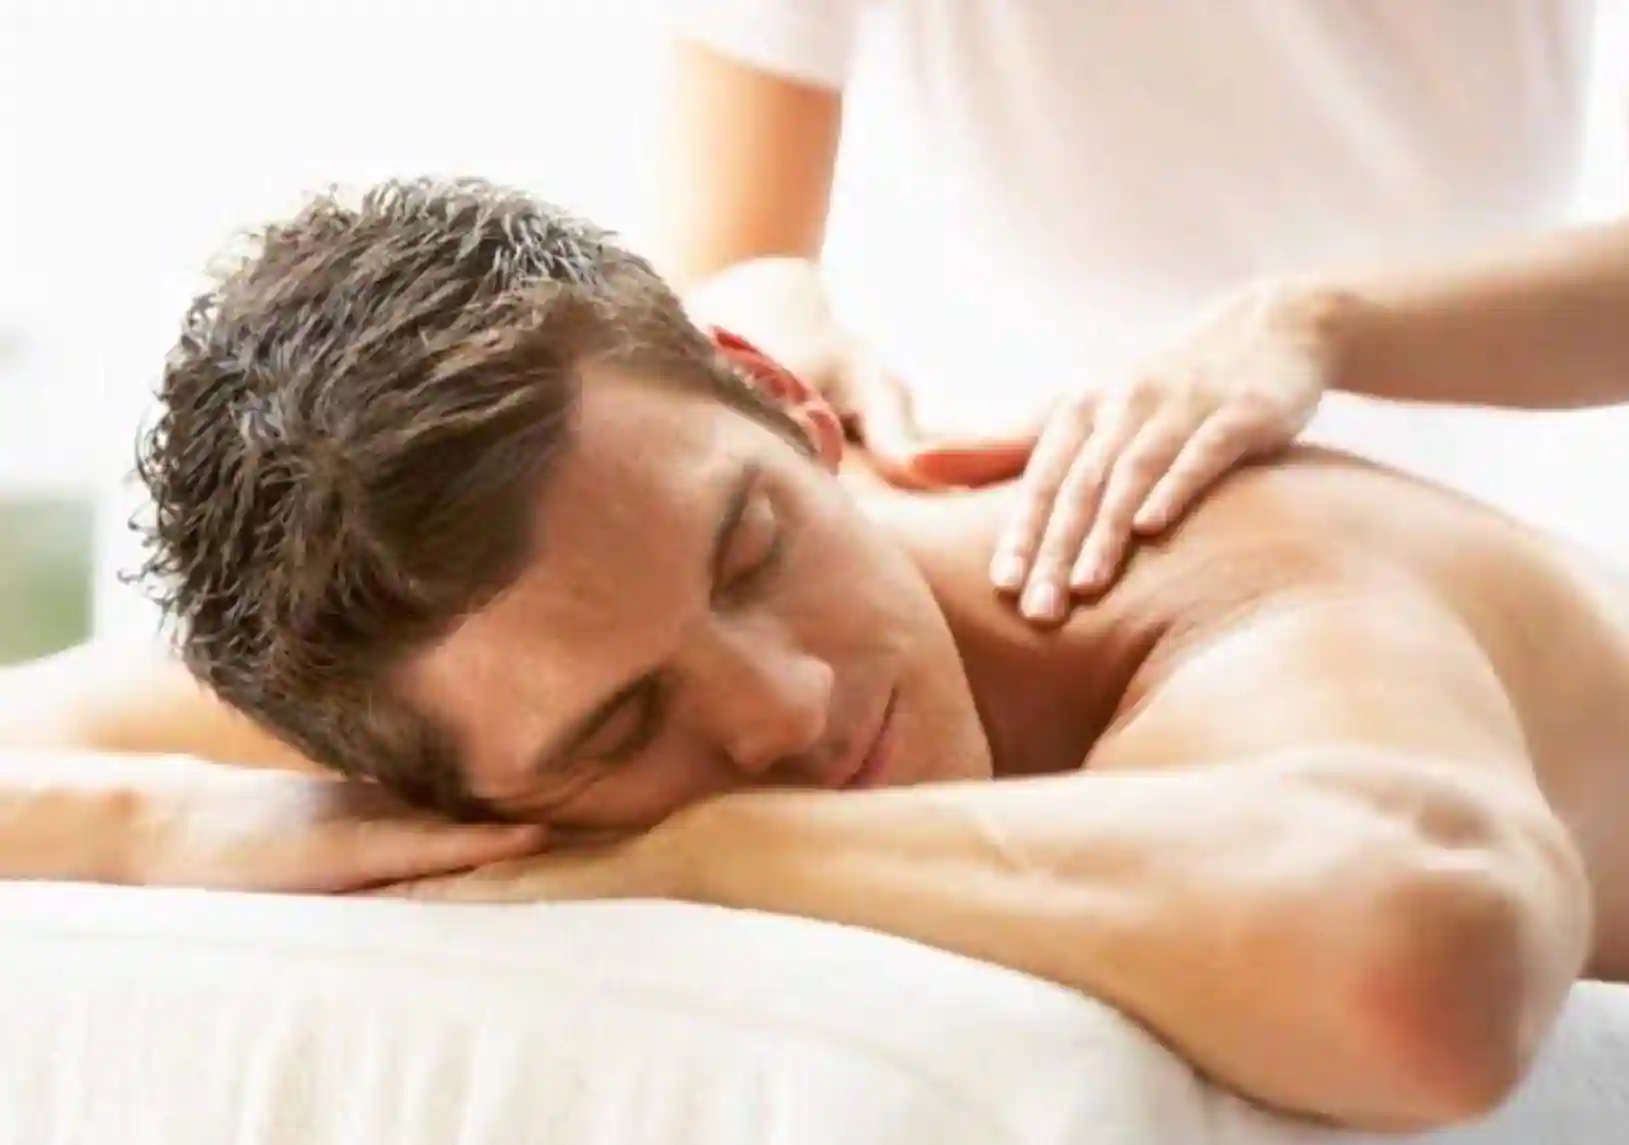 Guide on How to Make Your Massage Business Better